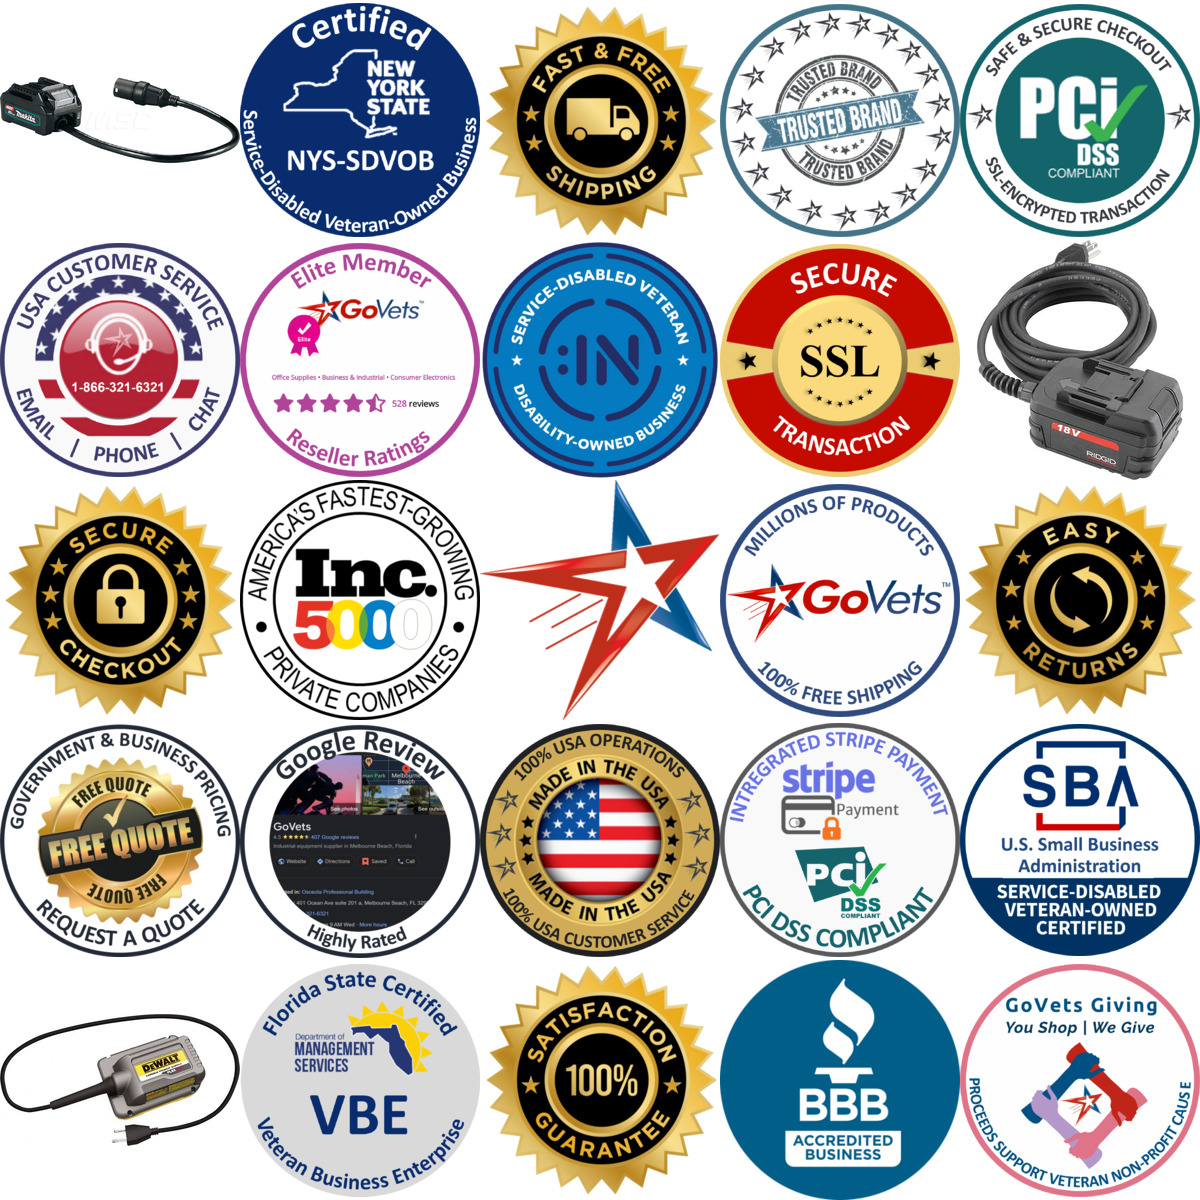 A selection of Power Tool Cords products on GoVets